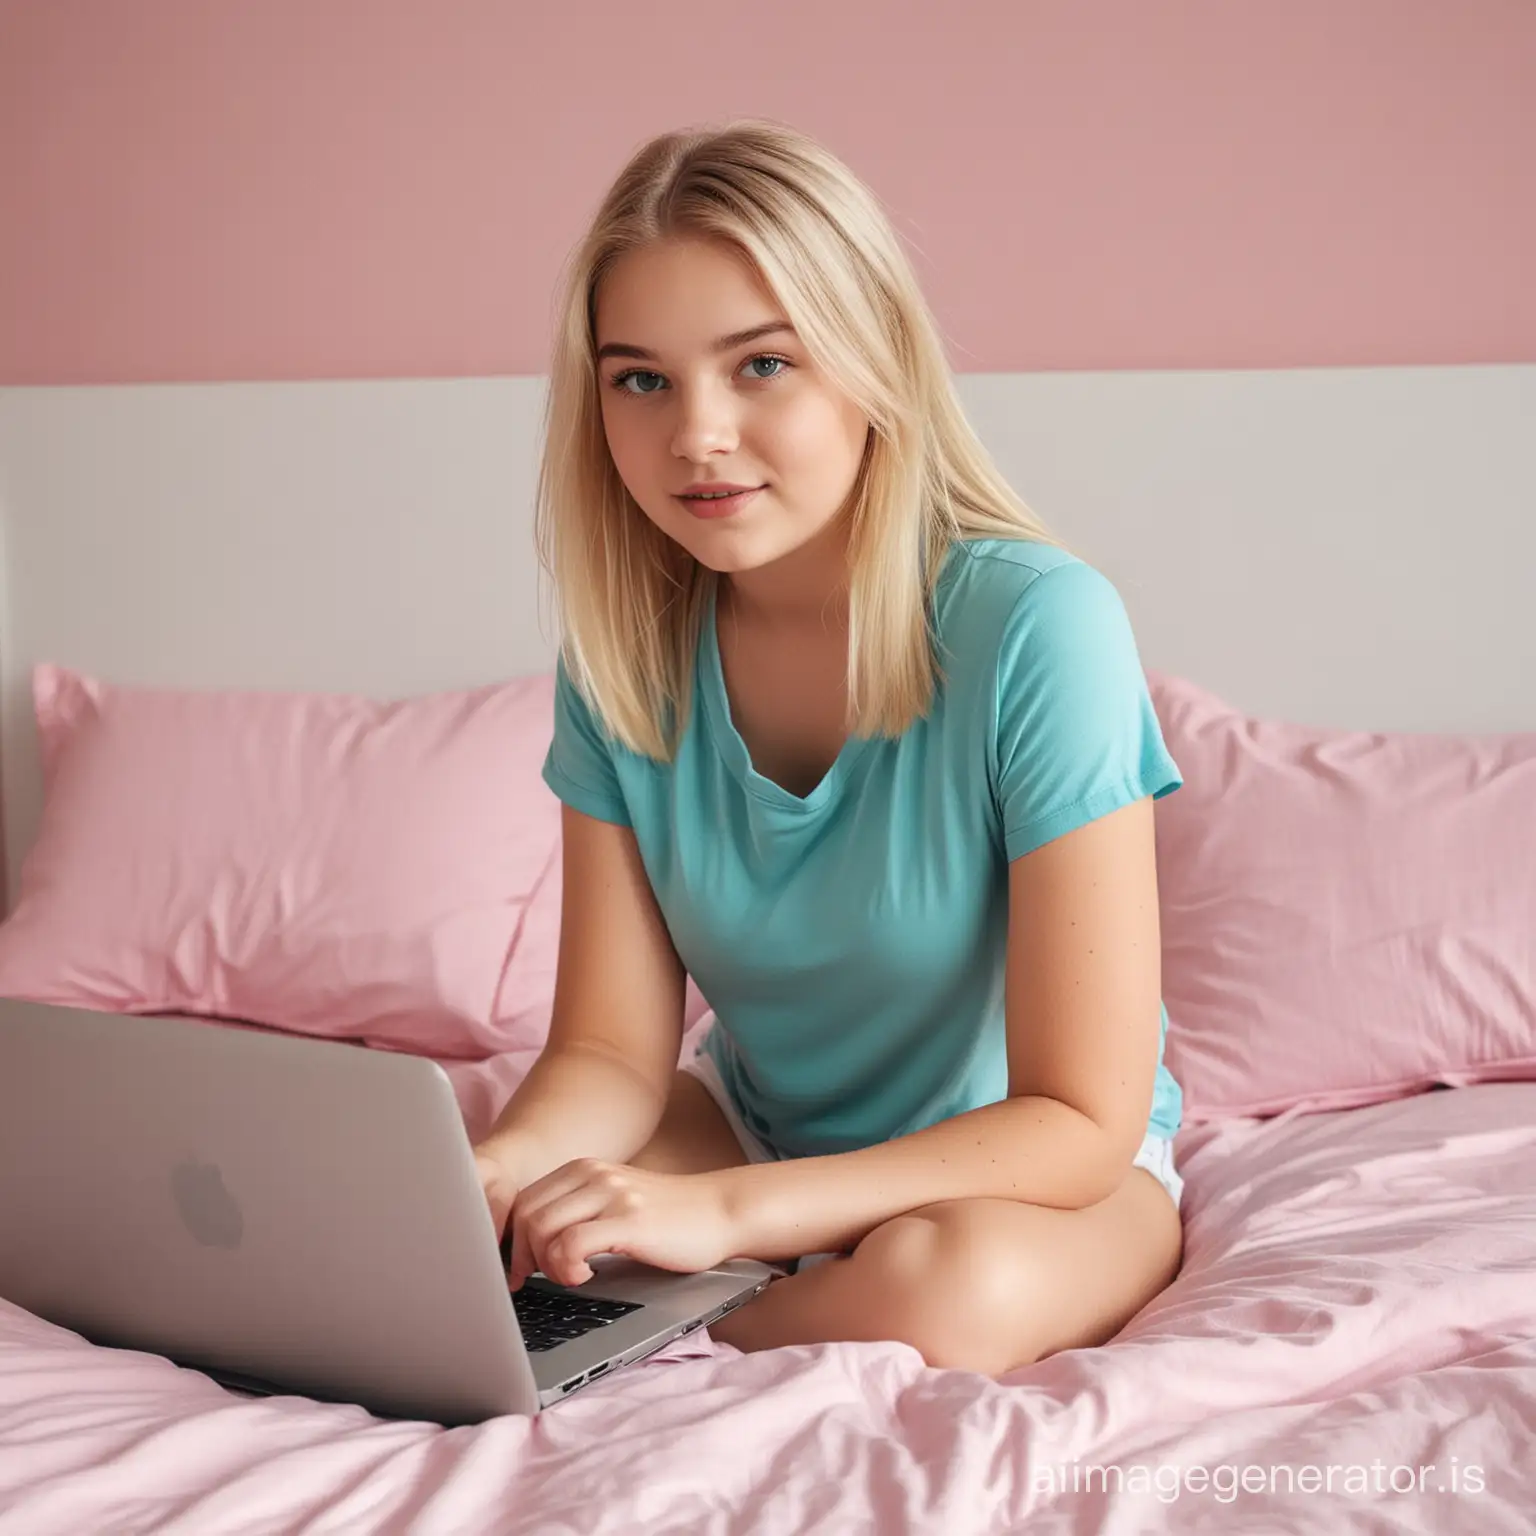 Teenage-Girl-with-Laptop-on-Pink-Bed